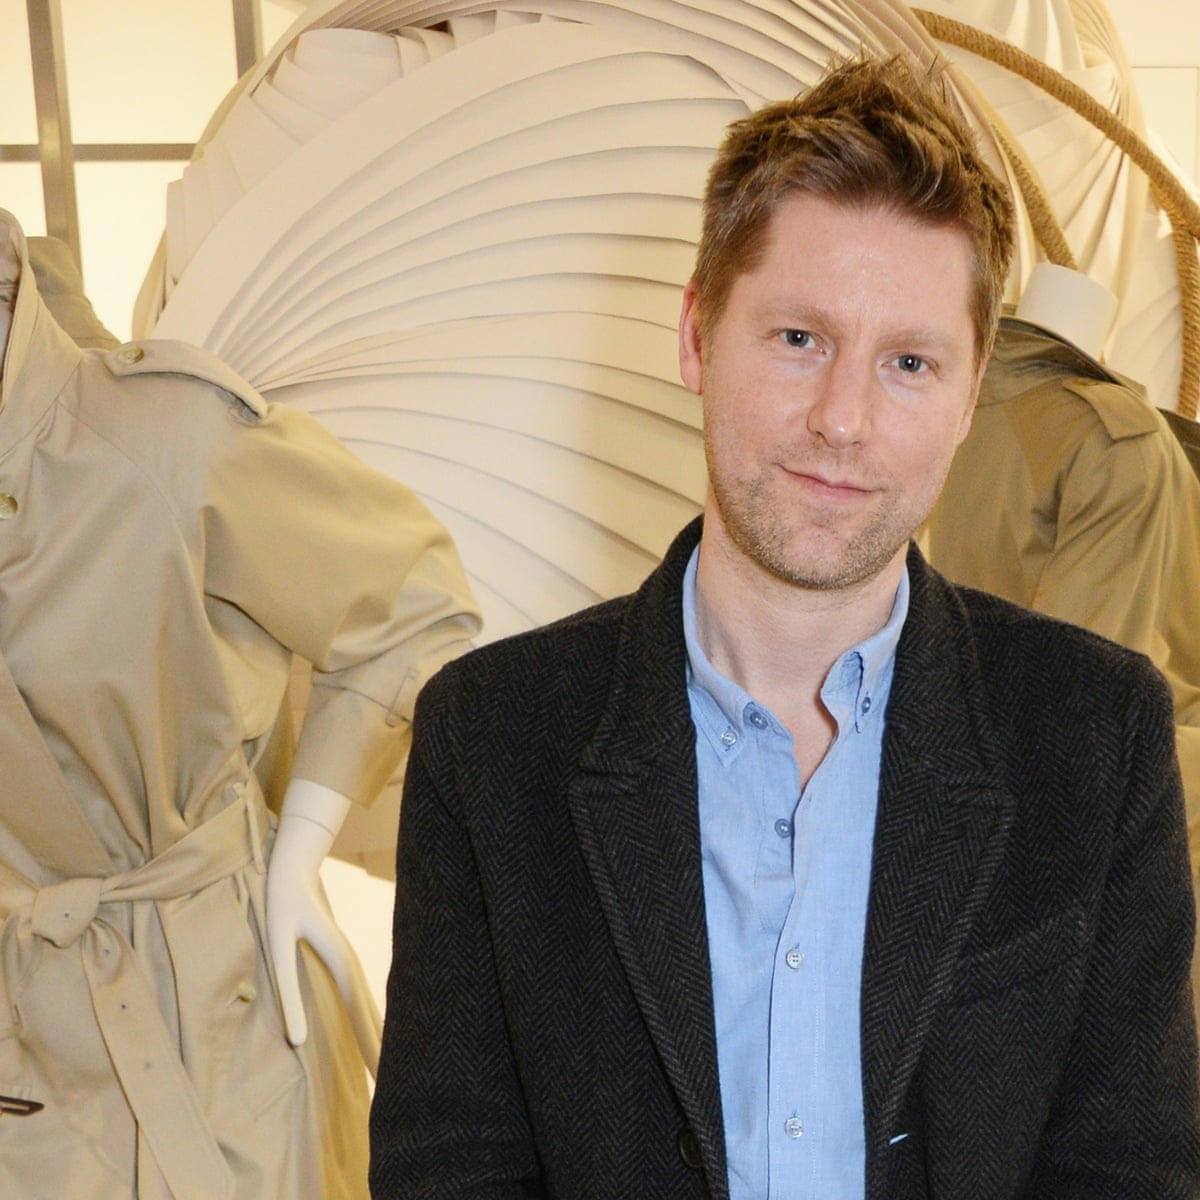 kant knal Gepensioneerd Christopher Bailey to cut all ties with Burberry | Burberry group | The  Guardian